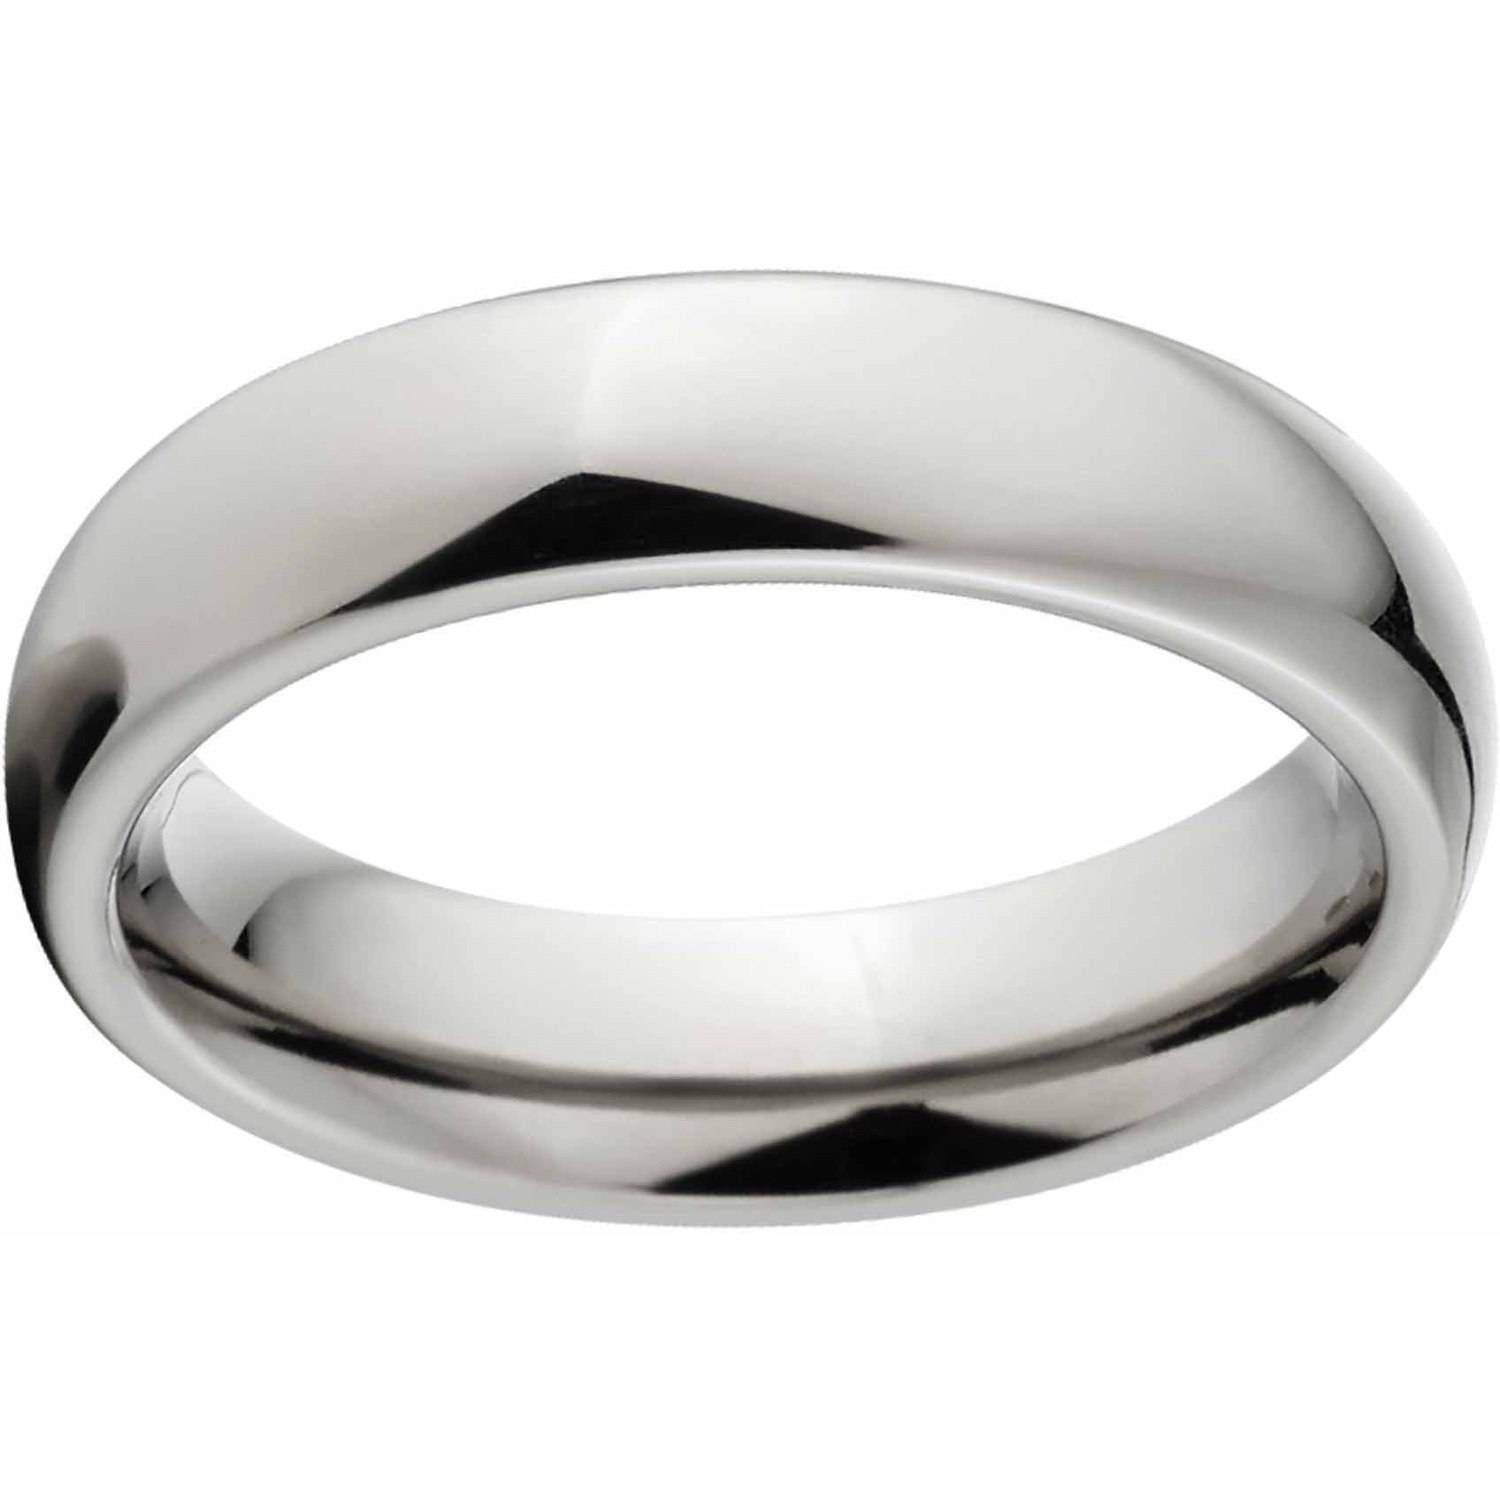 Polished 4mm Titanium Wedding Band With Comfort Fit Design Throughout Walmart Jewelry Men&#039;s Wedding Bands (View 3 of 15)